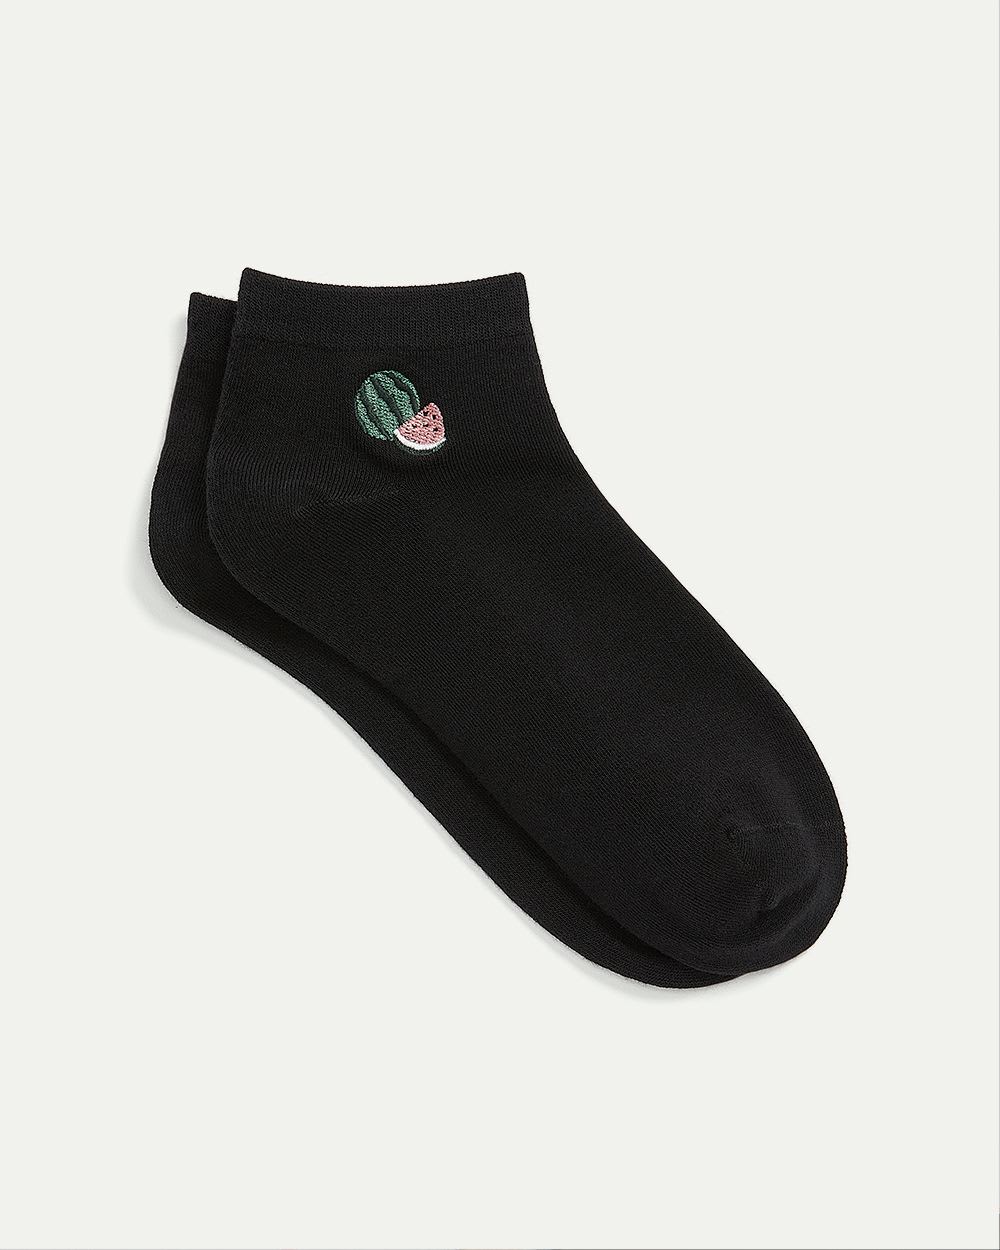 Cotton Anklet Socks with Watermelon at Hem